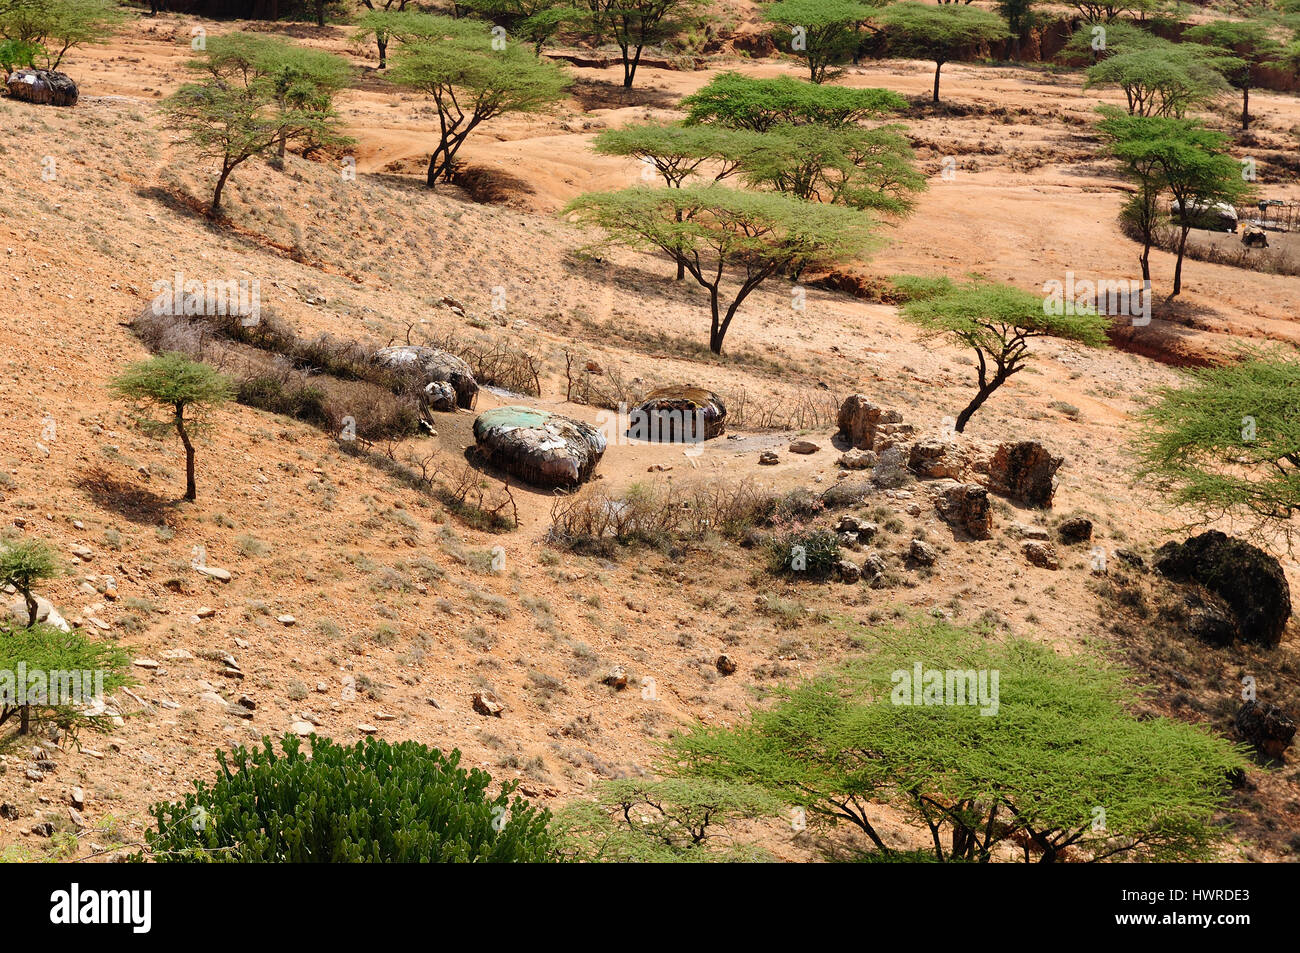 Kenya, Mountain landscapes in surroundings of the  South Horr village of Samburu people on the way to the Turkana lake. Stock Photo